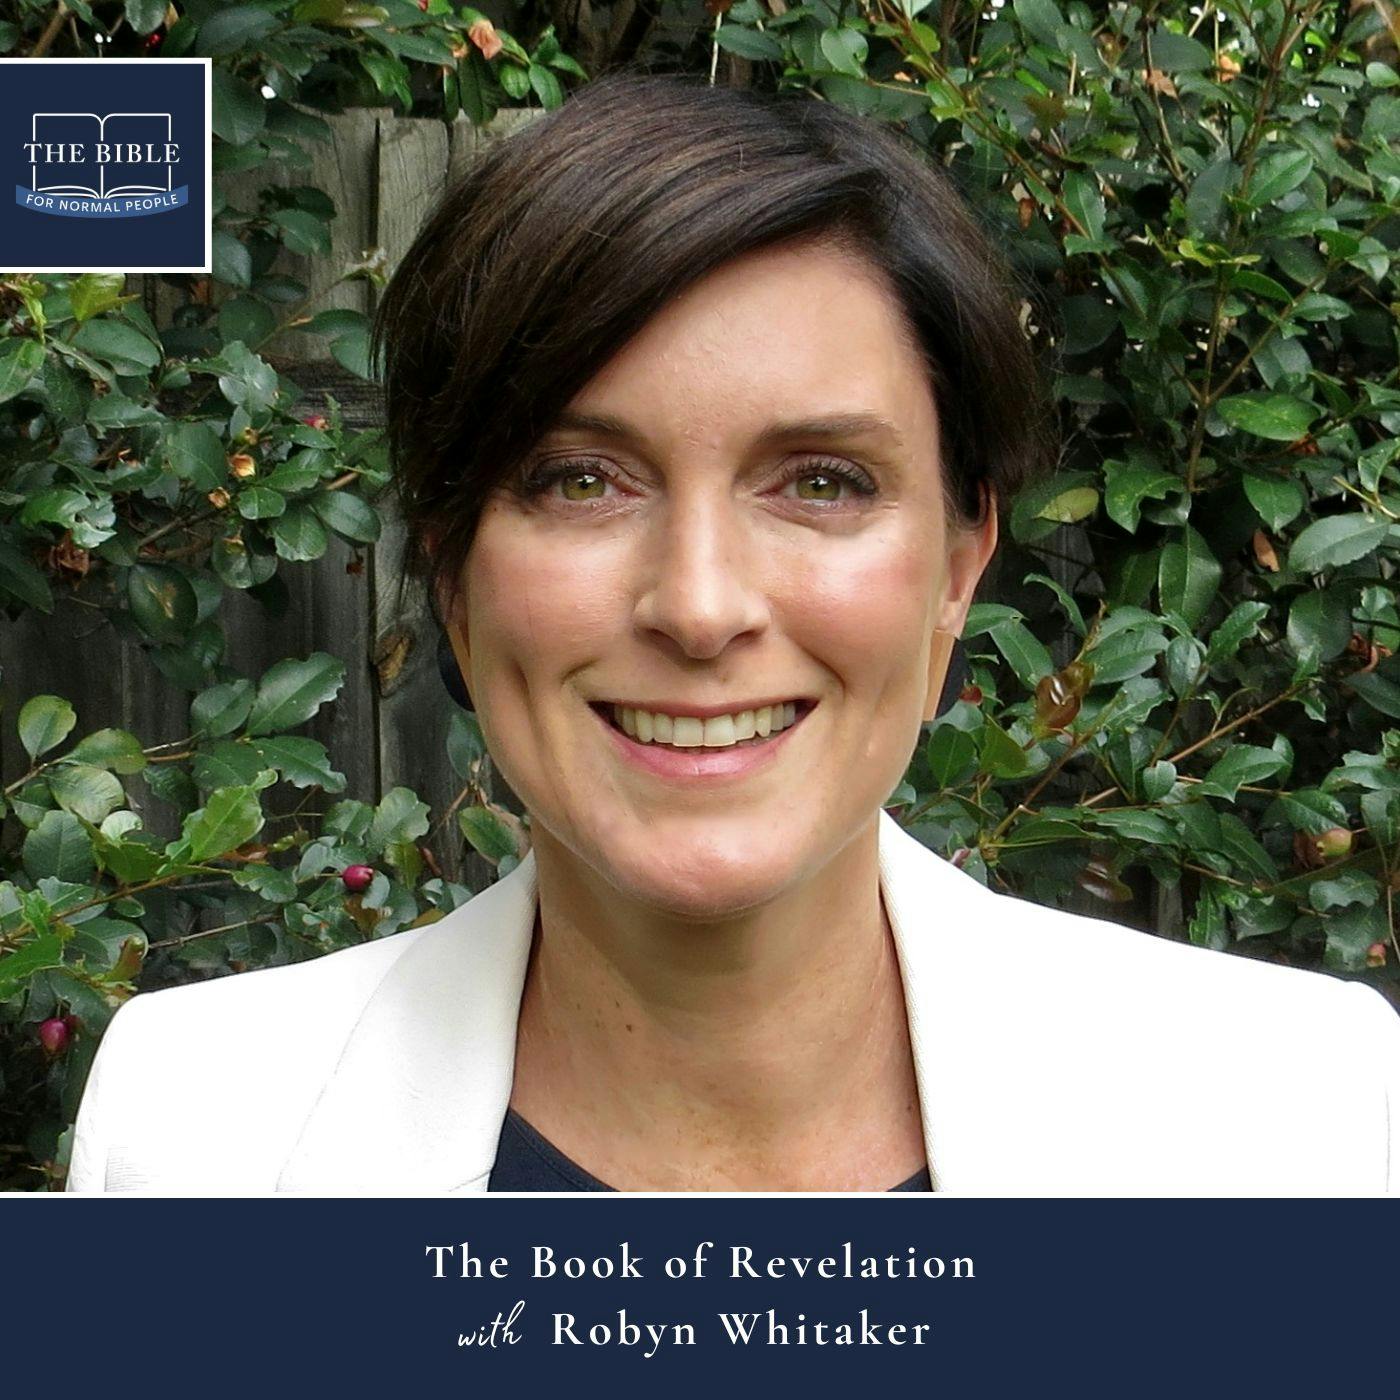 [Bible] Episode 259: Robyn Whitaker - The Book of Revelation